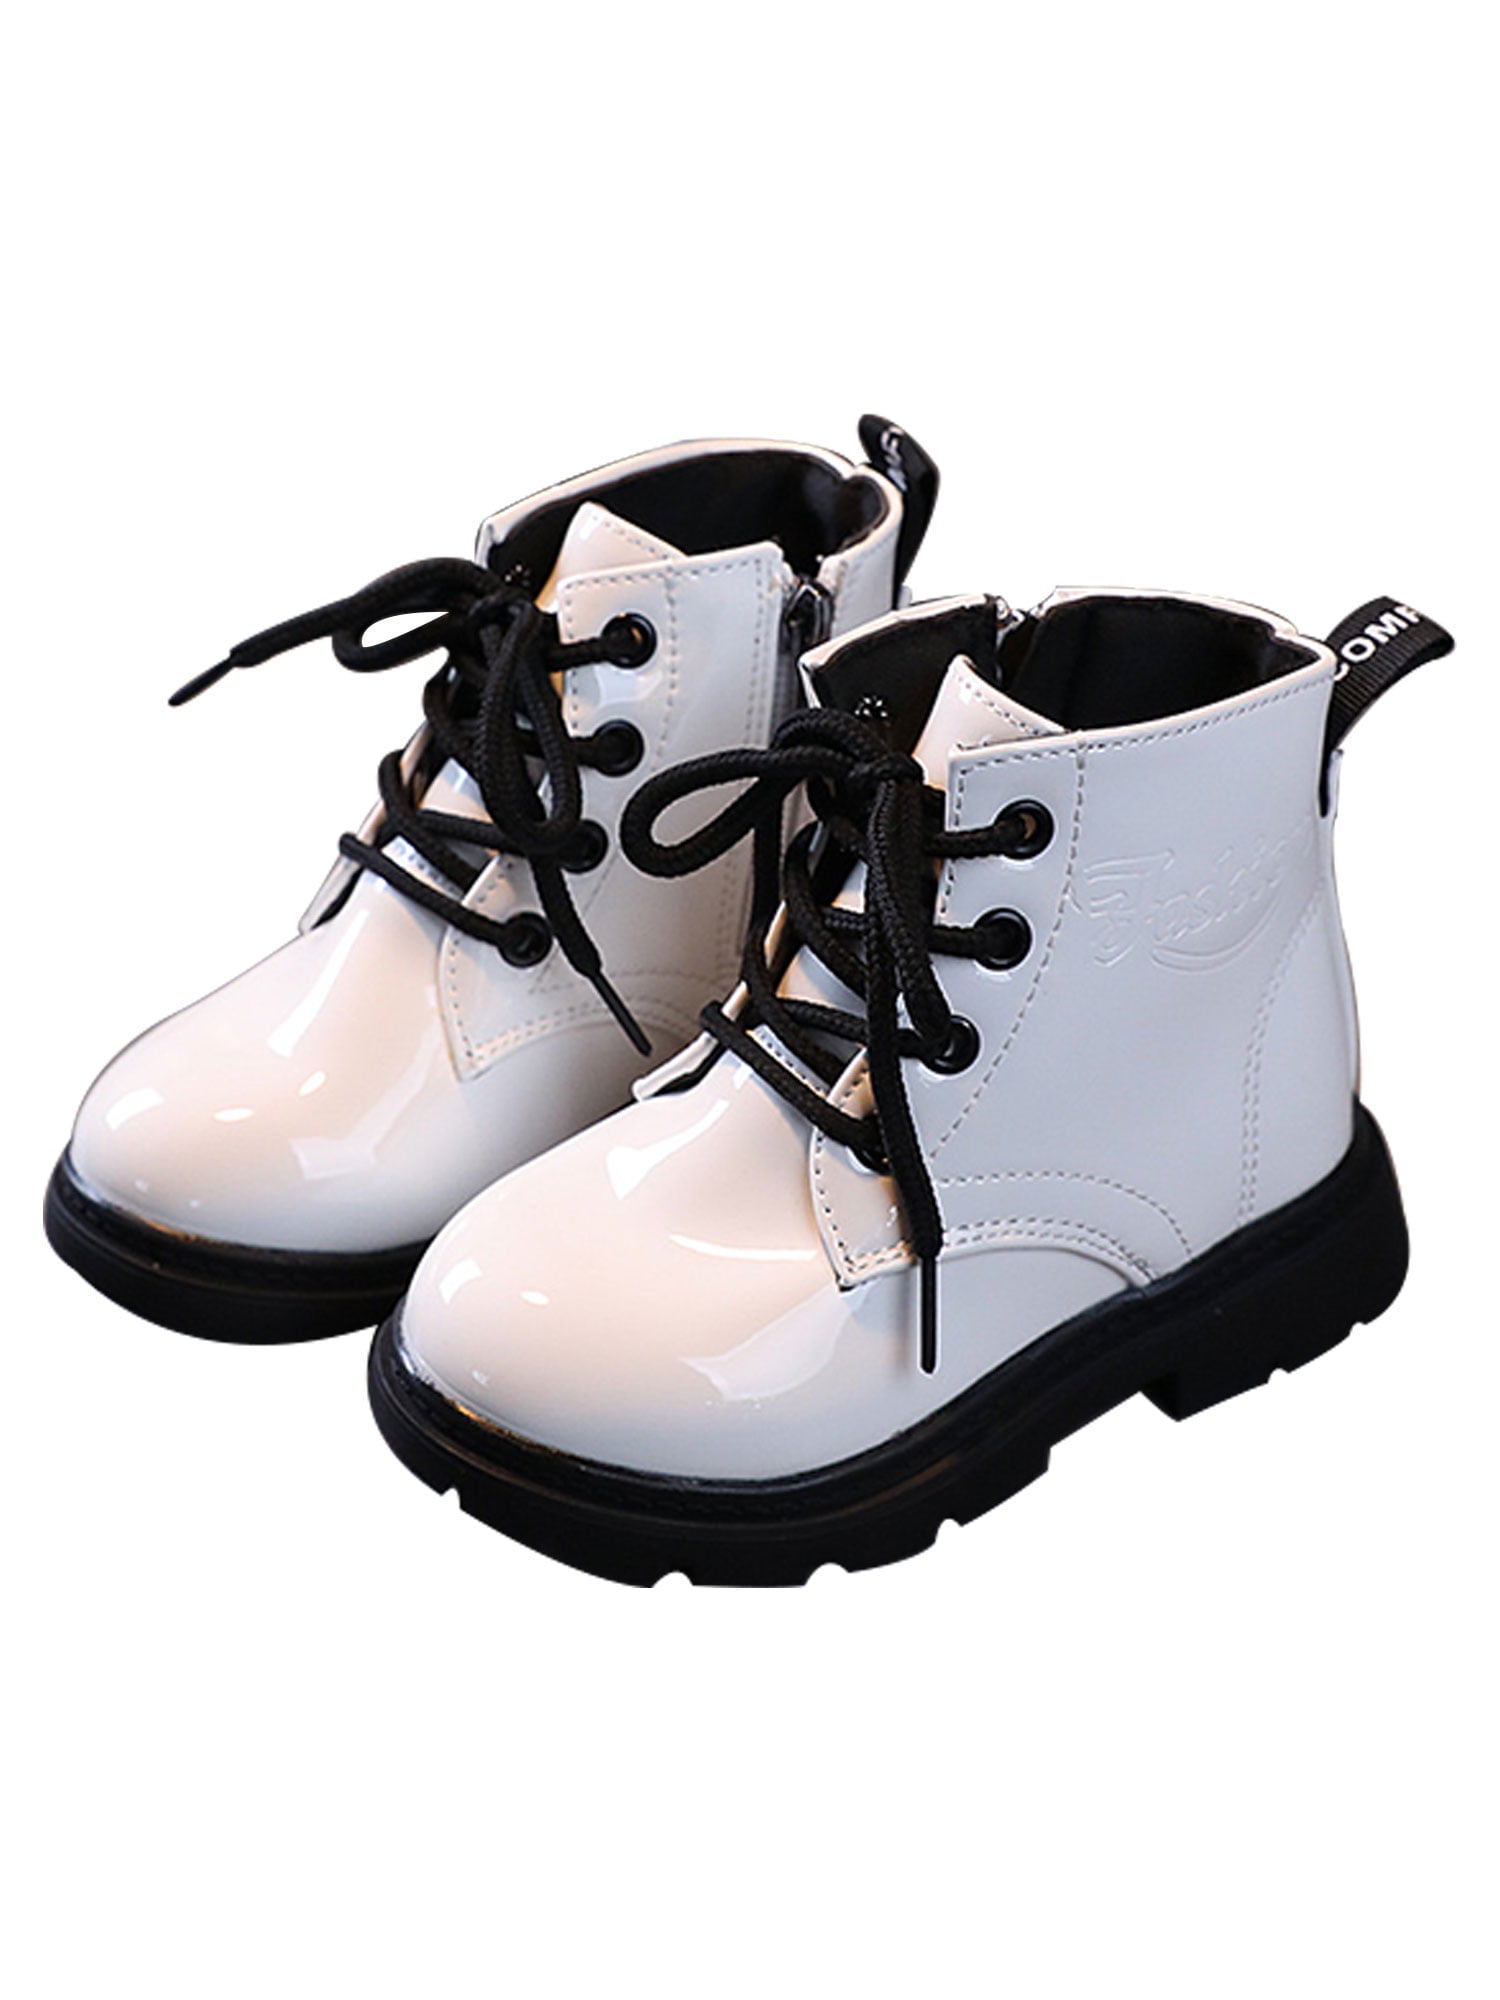 Details about   Men Outdoor Hiking Leather Shoes Lace up Soft Non-slip Comfy Climbing Waterproof 